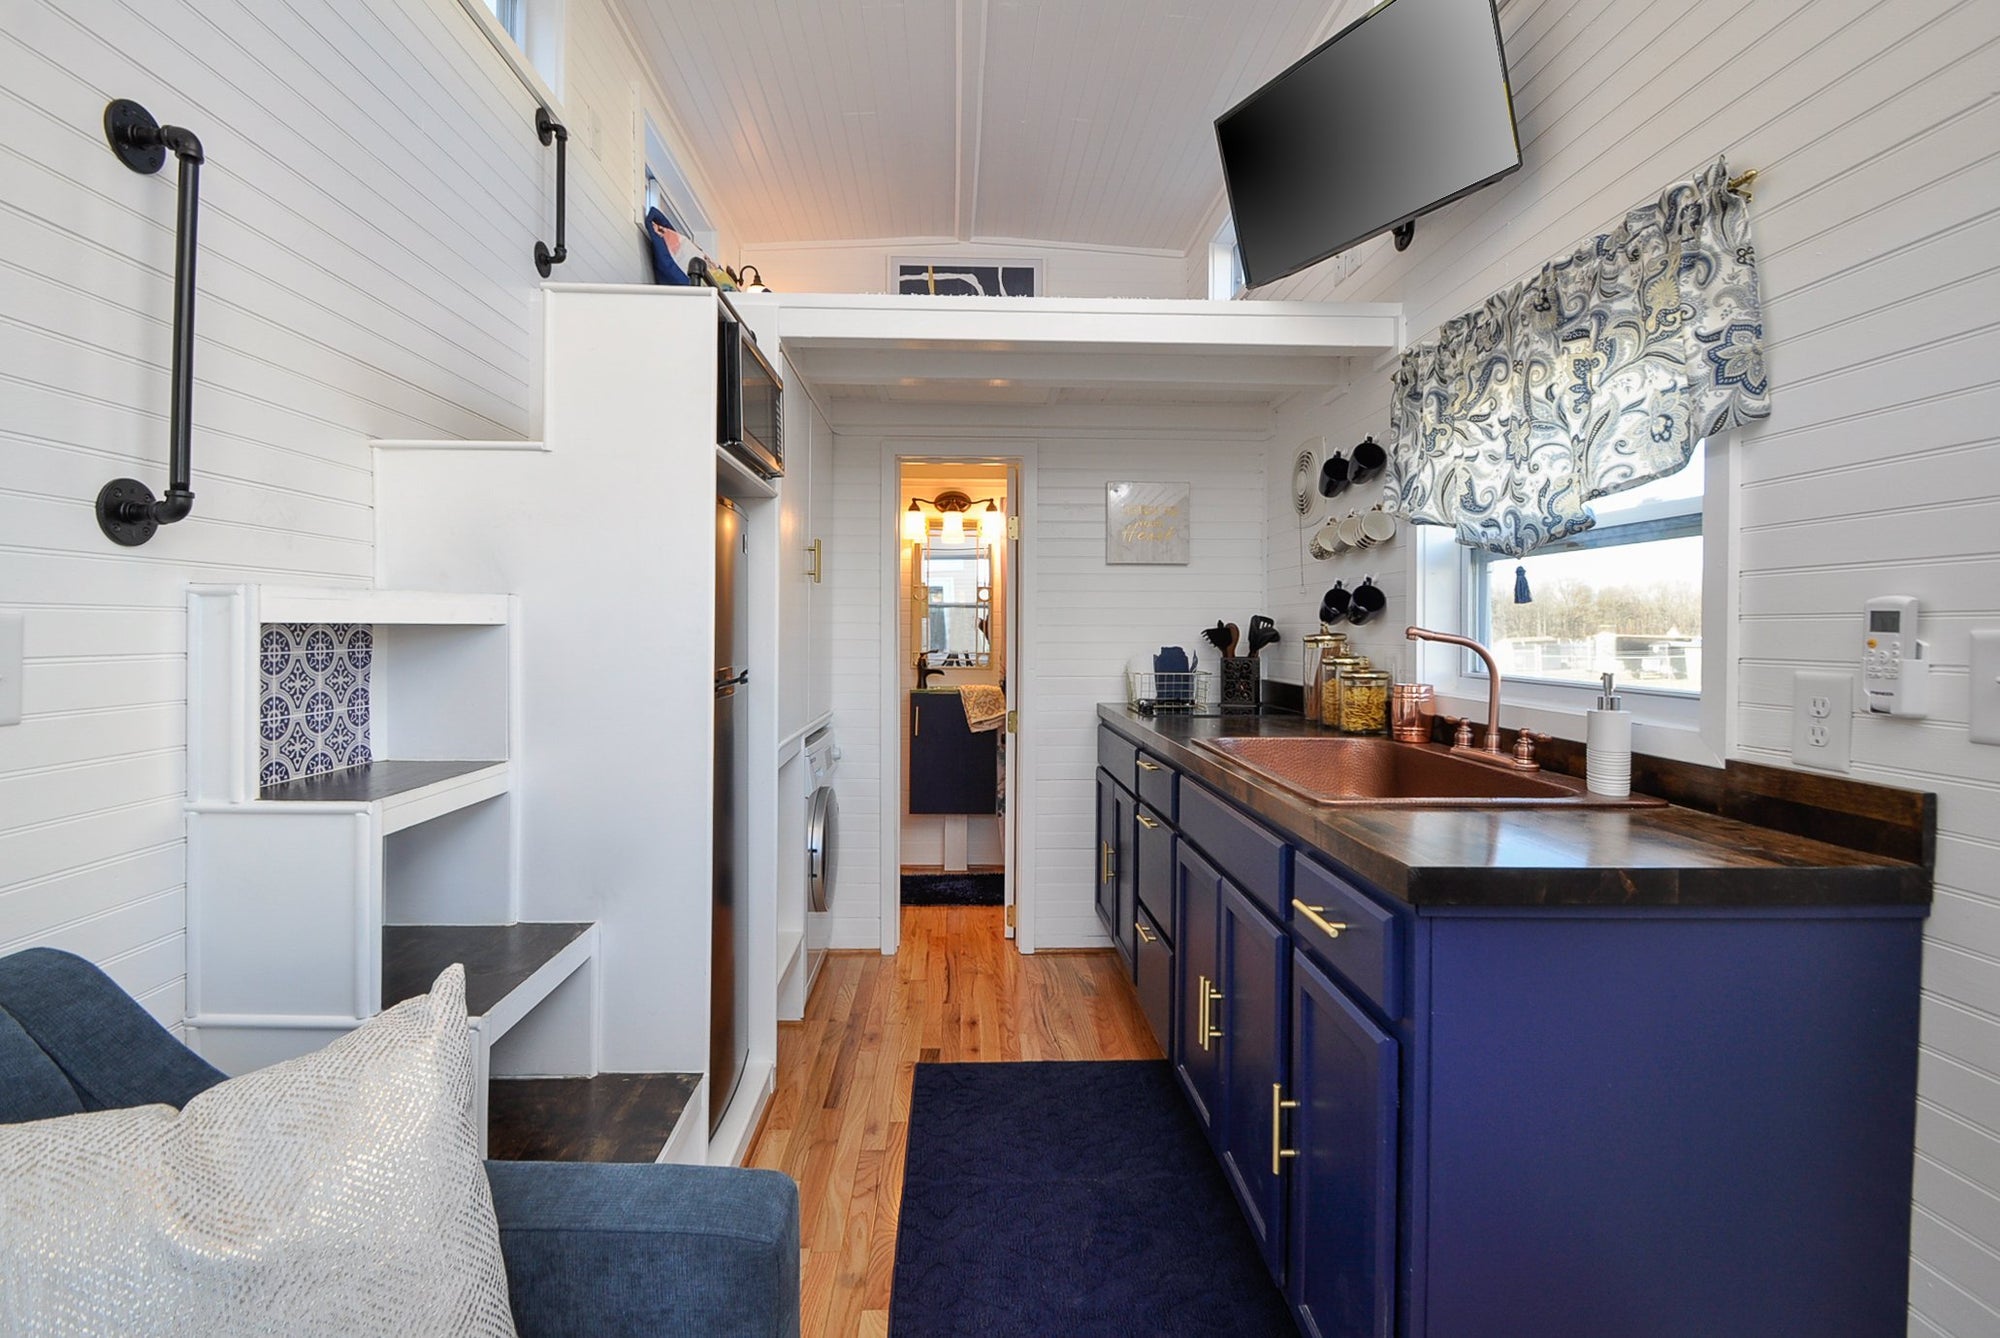 The Charming 18’ “Ascot” Tiny Home by Tiny House Building Company